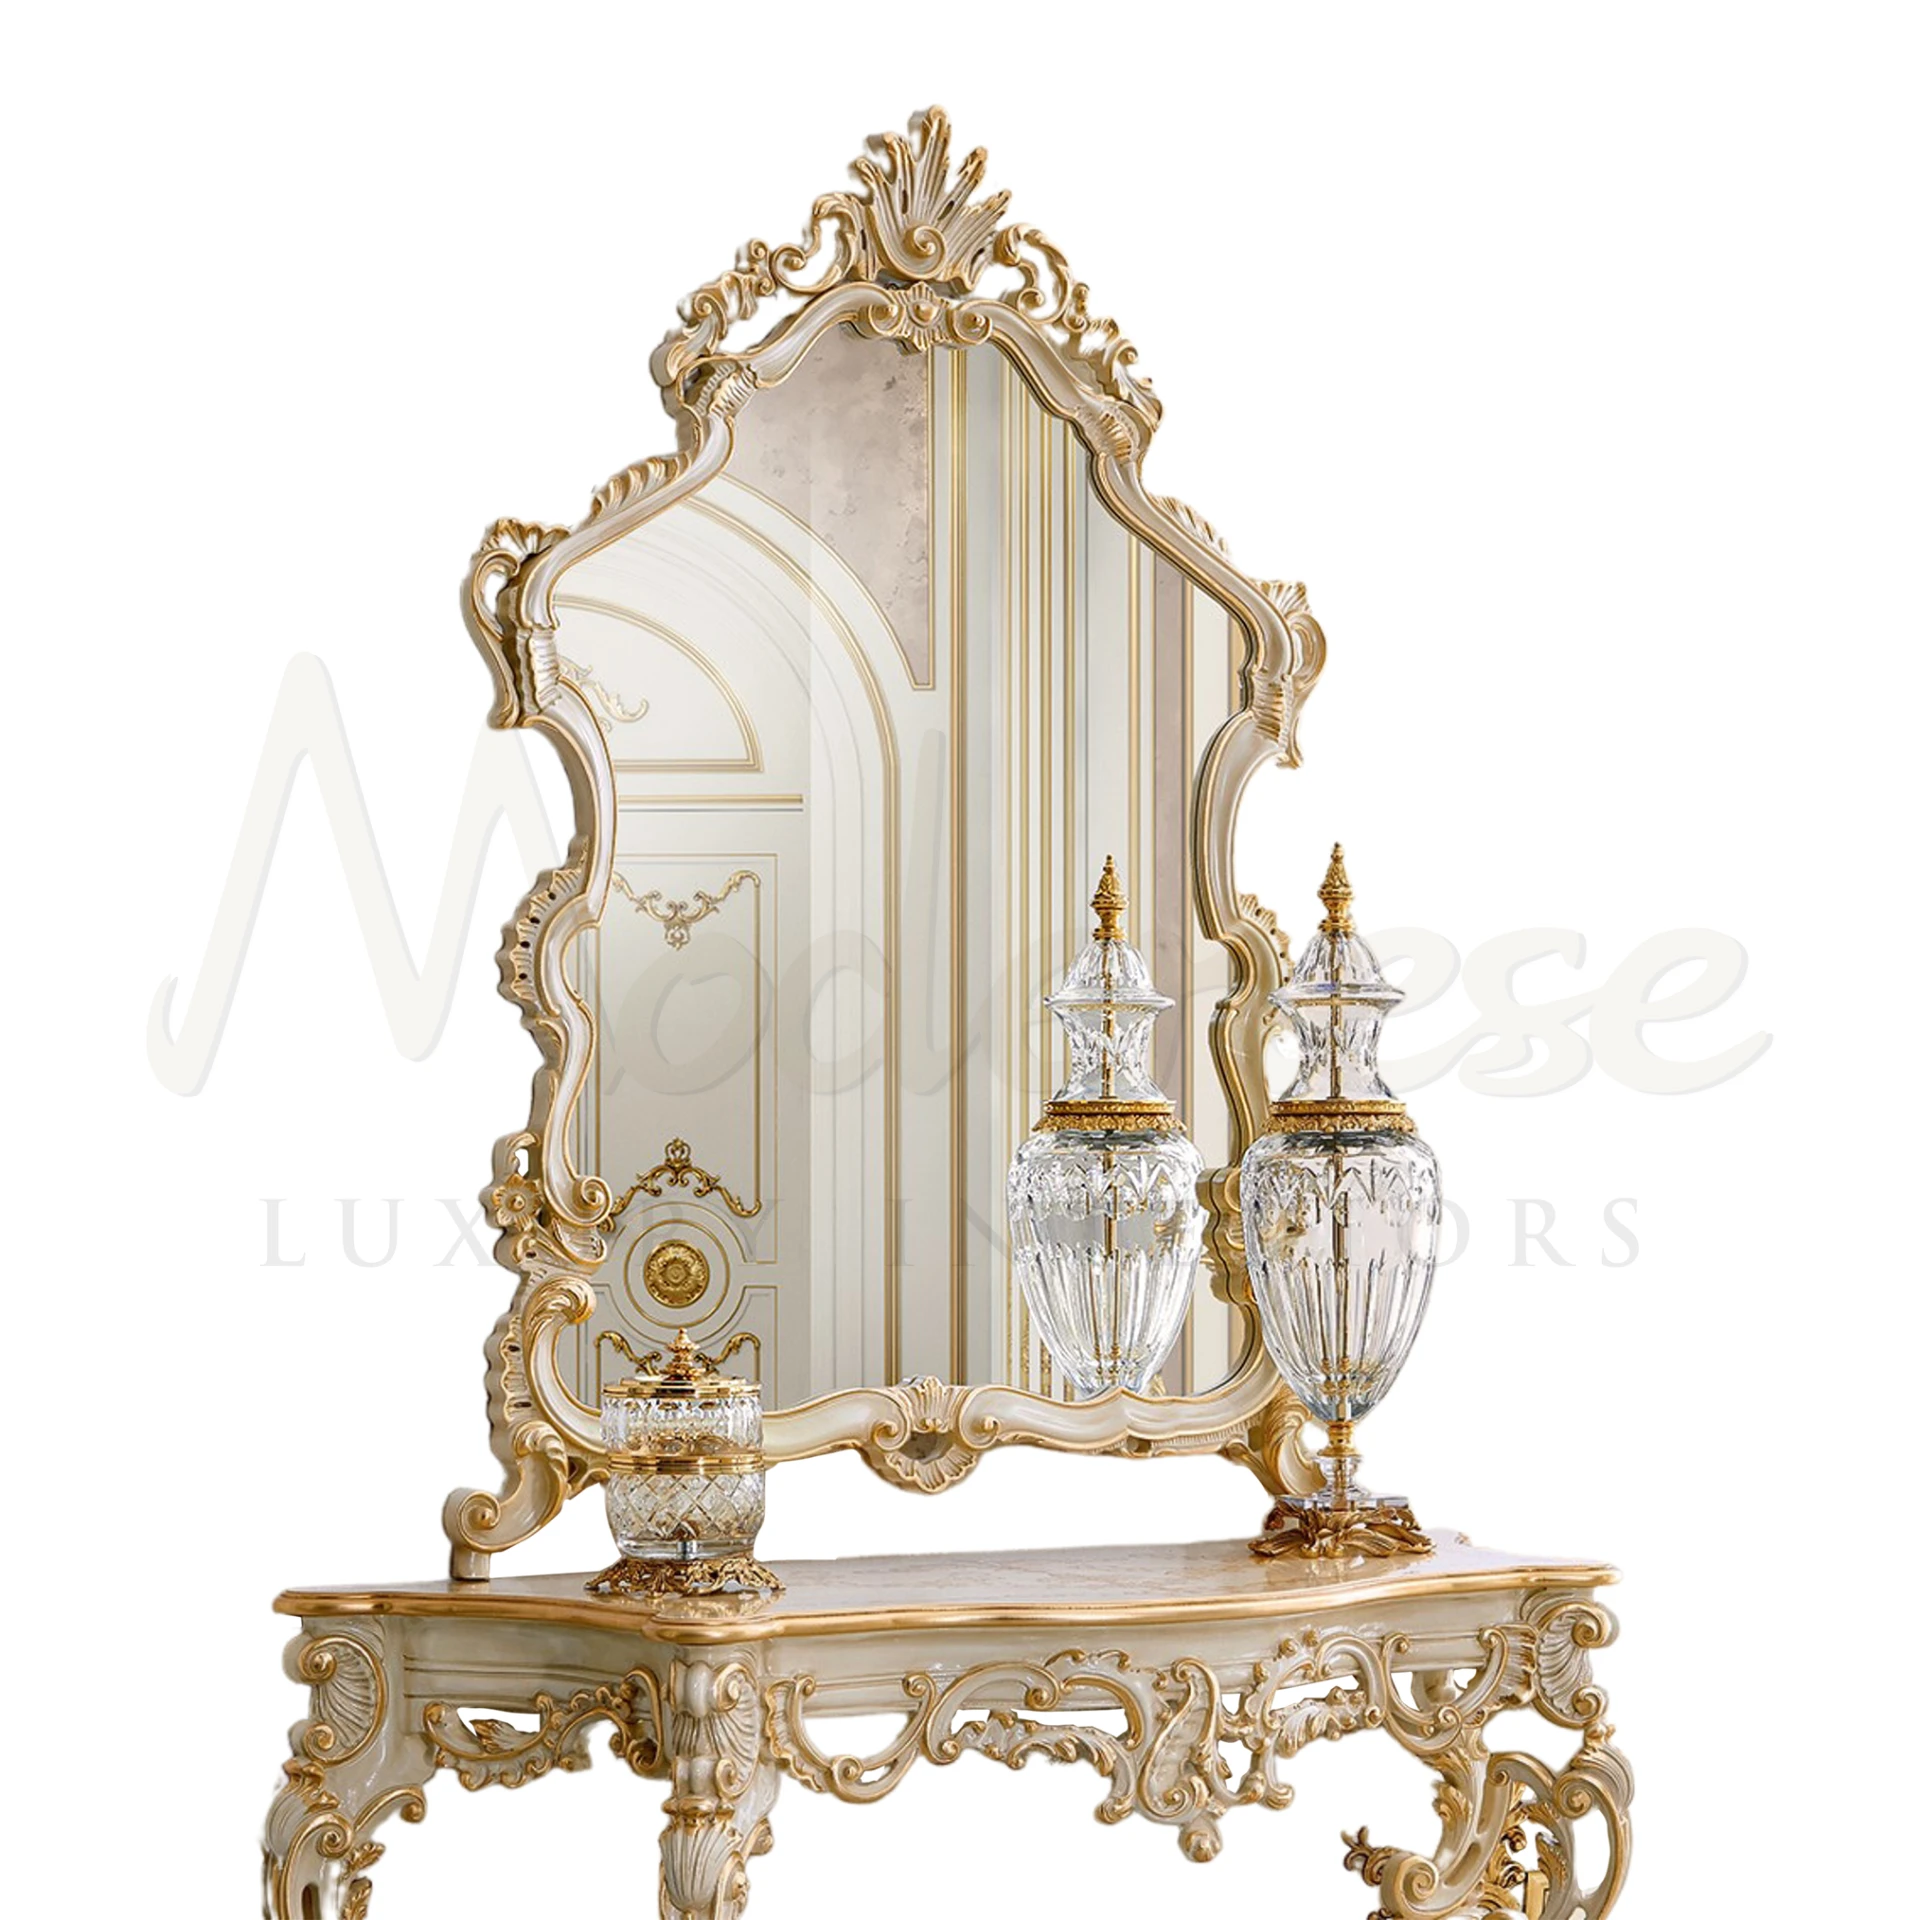 Exquisite Figured Mirror, hand-painted to perfection, showcases customized craftsmanship in luxury mirror design.